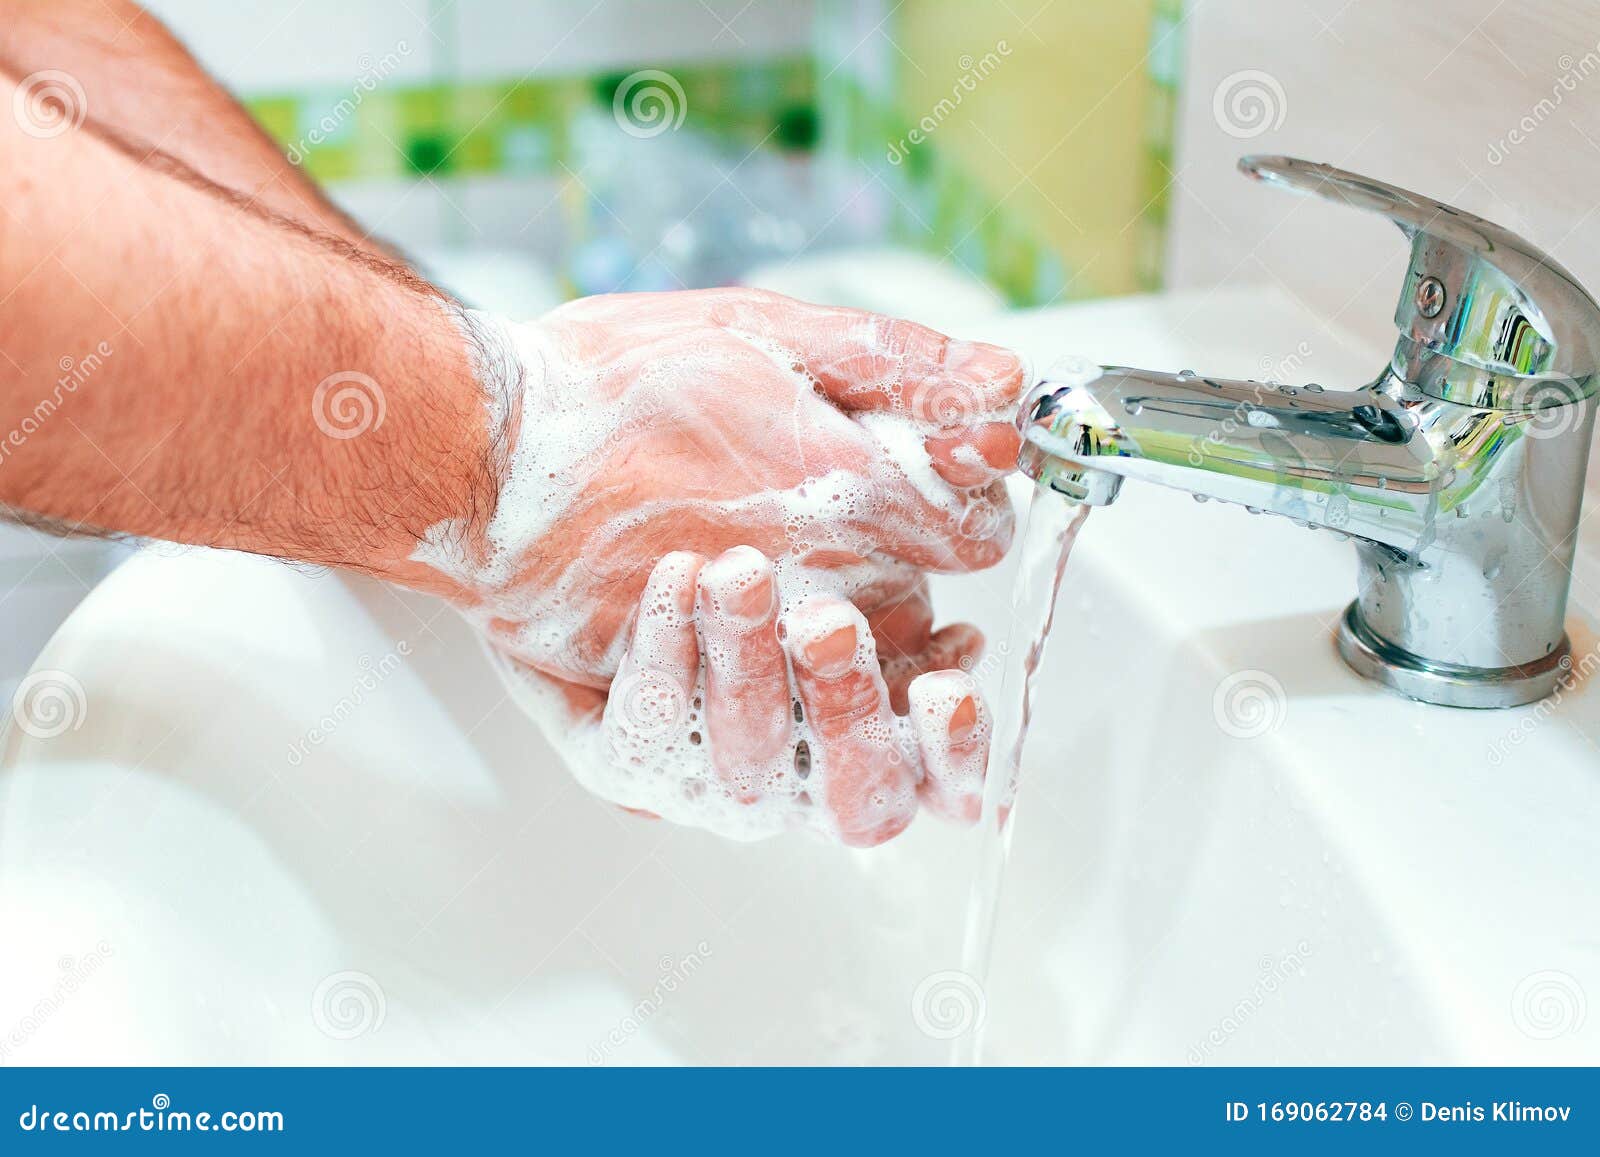 Have you washed your hands. Hand washing facilities. Man Washes hand. Идеи на тему строго для мытья рук. Мужчина моет руки счастливые.